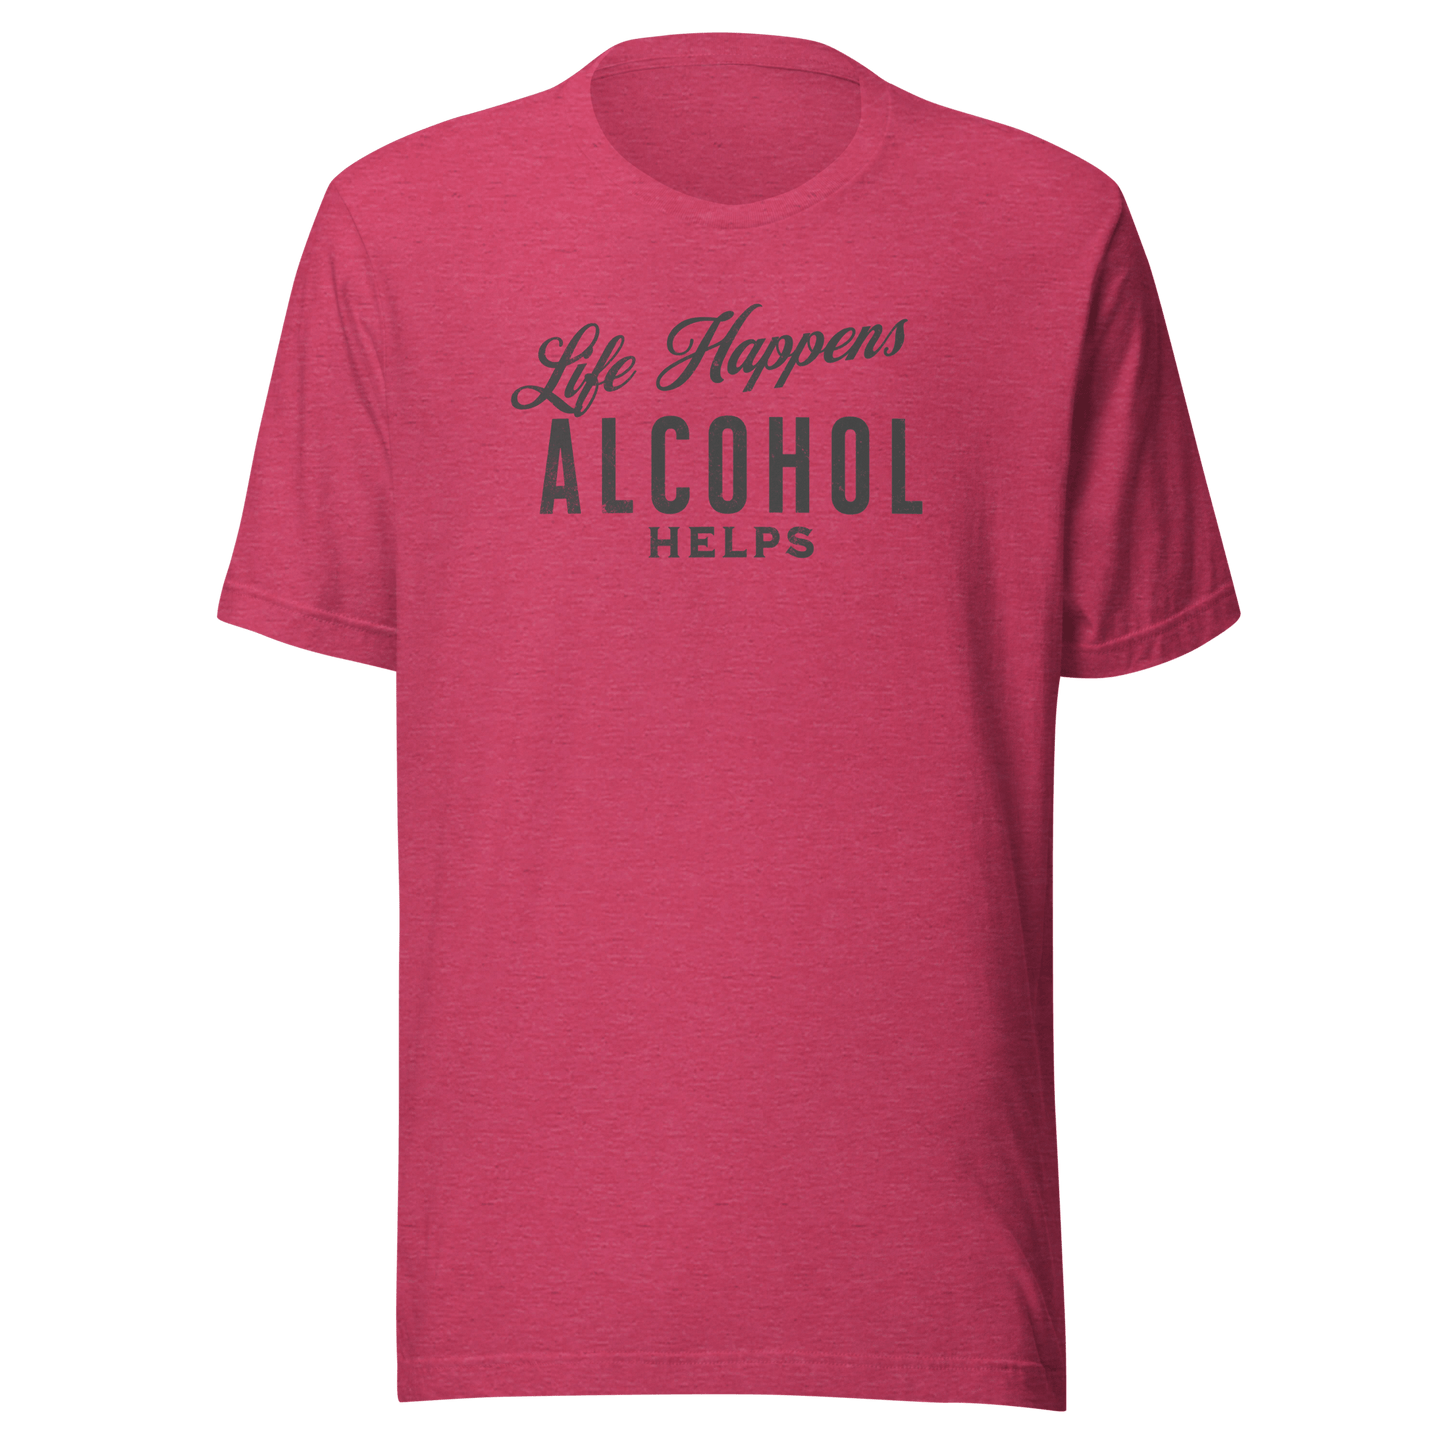 "Life Happens Alcohol Helps" T-Shirt: Embrace Fun! Get your hands on the ultimate funny drinking t-shirt. Comfortable, lightweight, and perfect for all. Dive into fun with style!